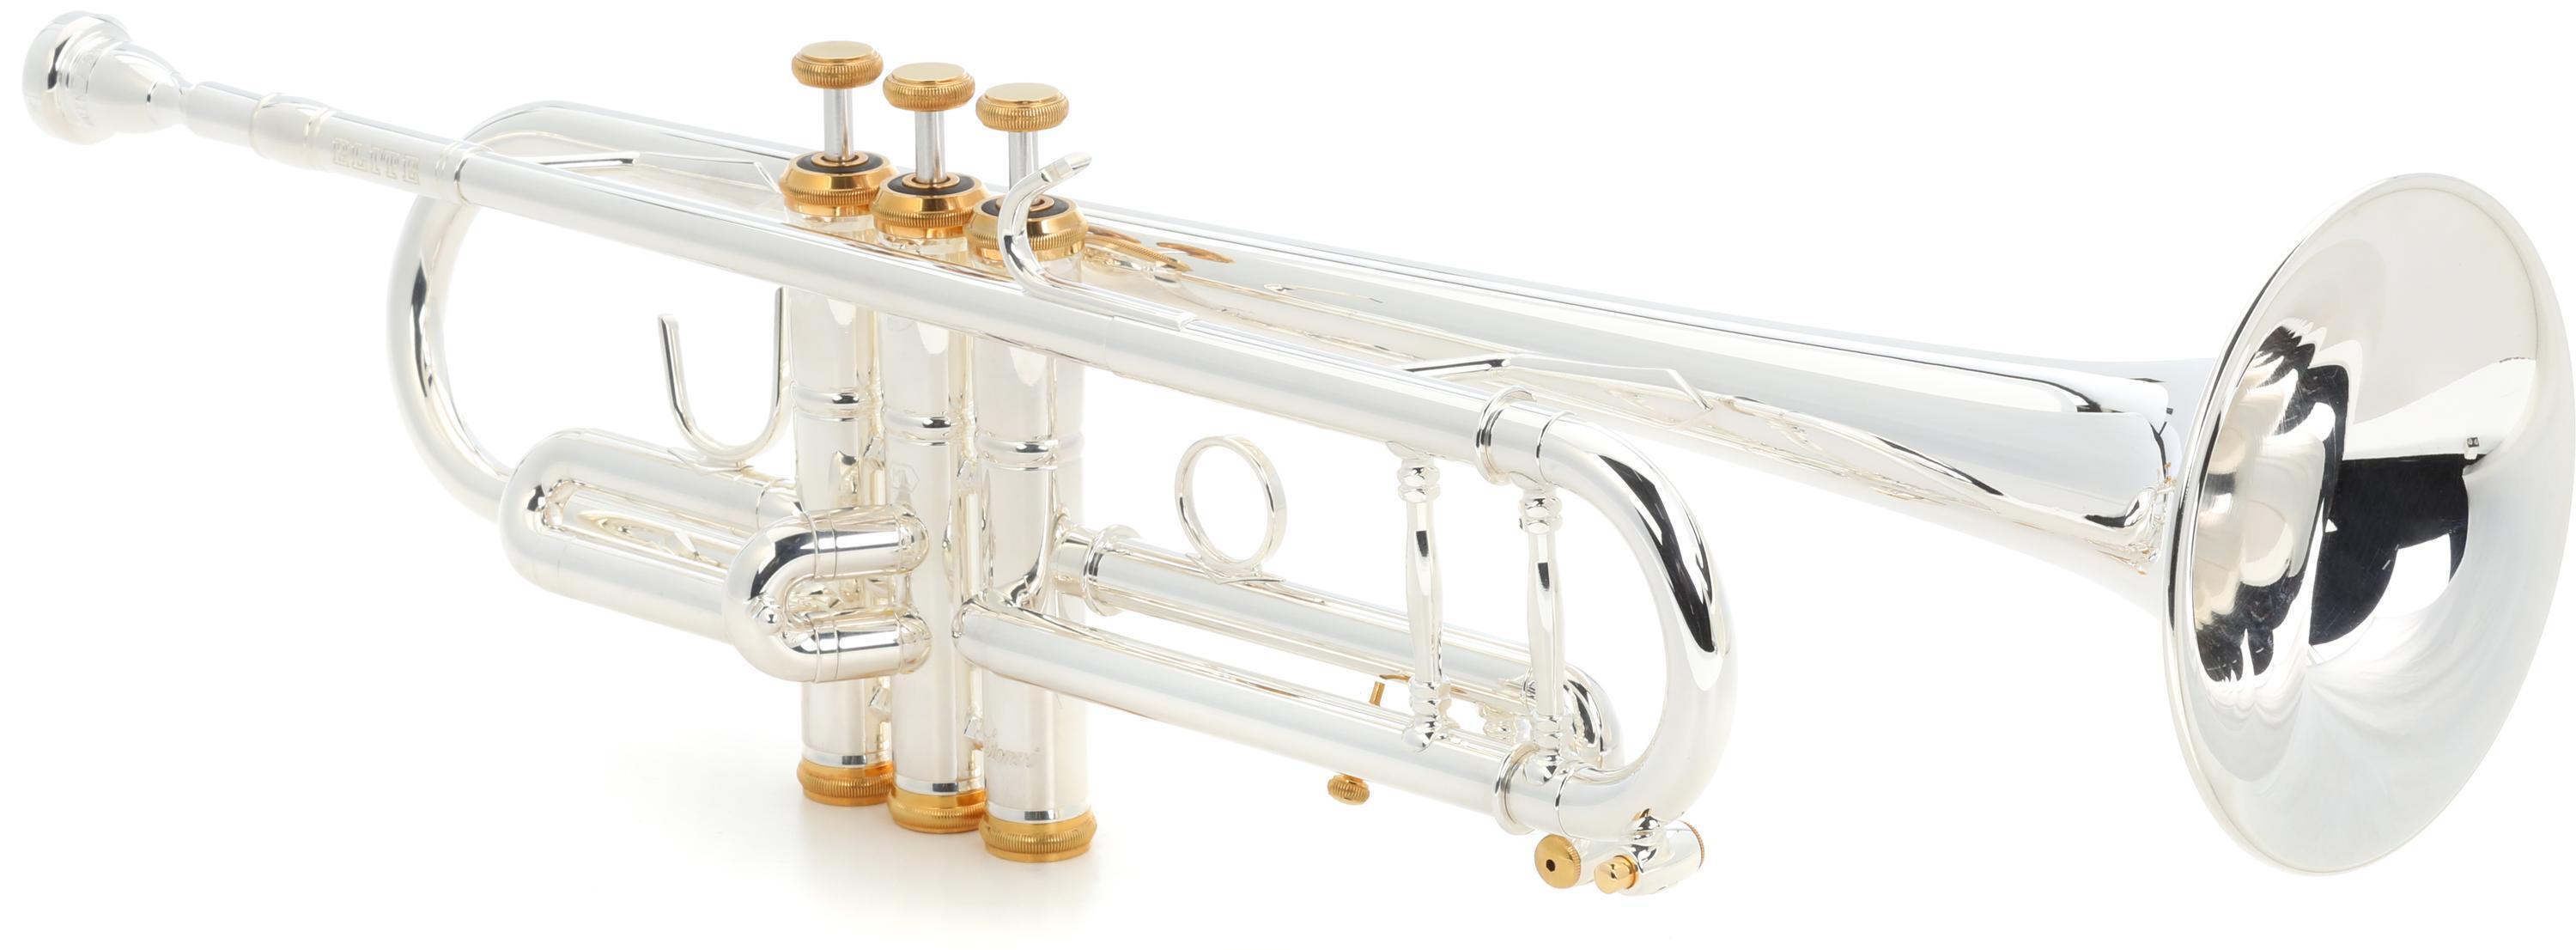 Stomvi 5330 Elite 250 Bb Trumpet - Silver-plated with Gold Trim 